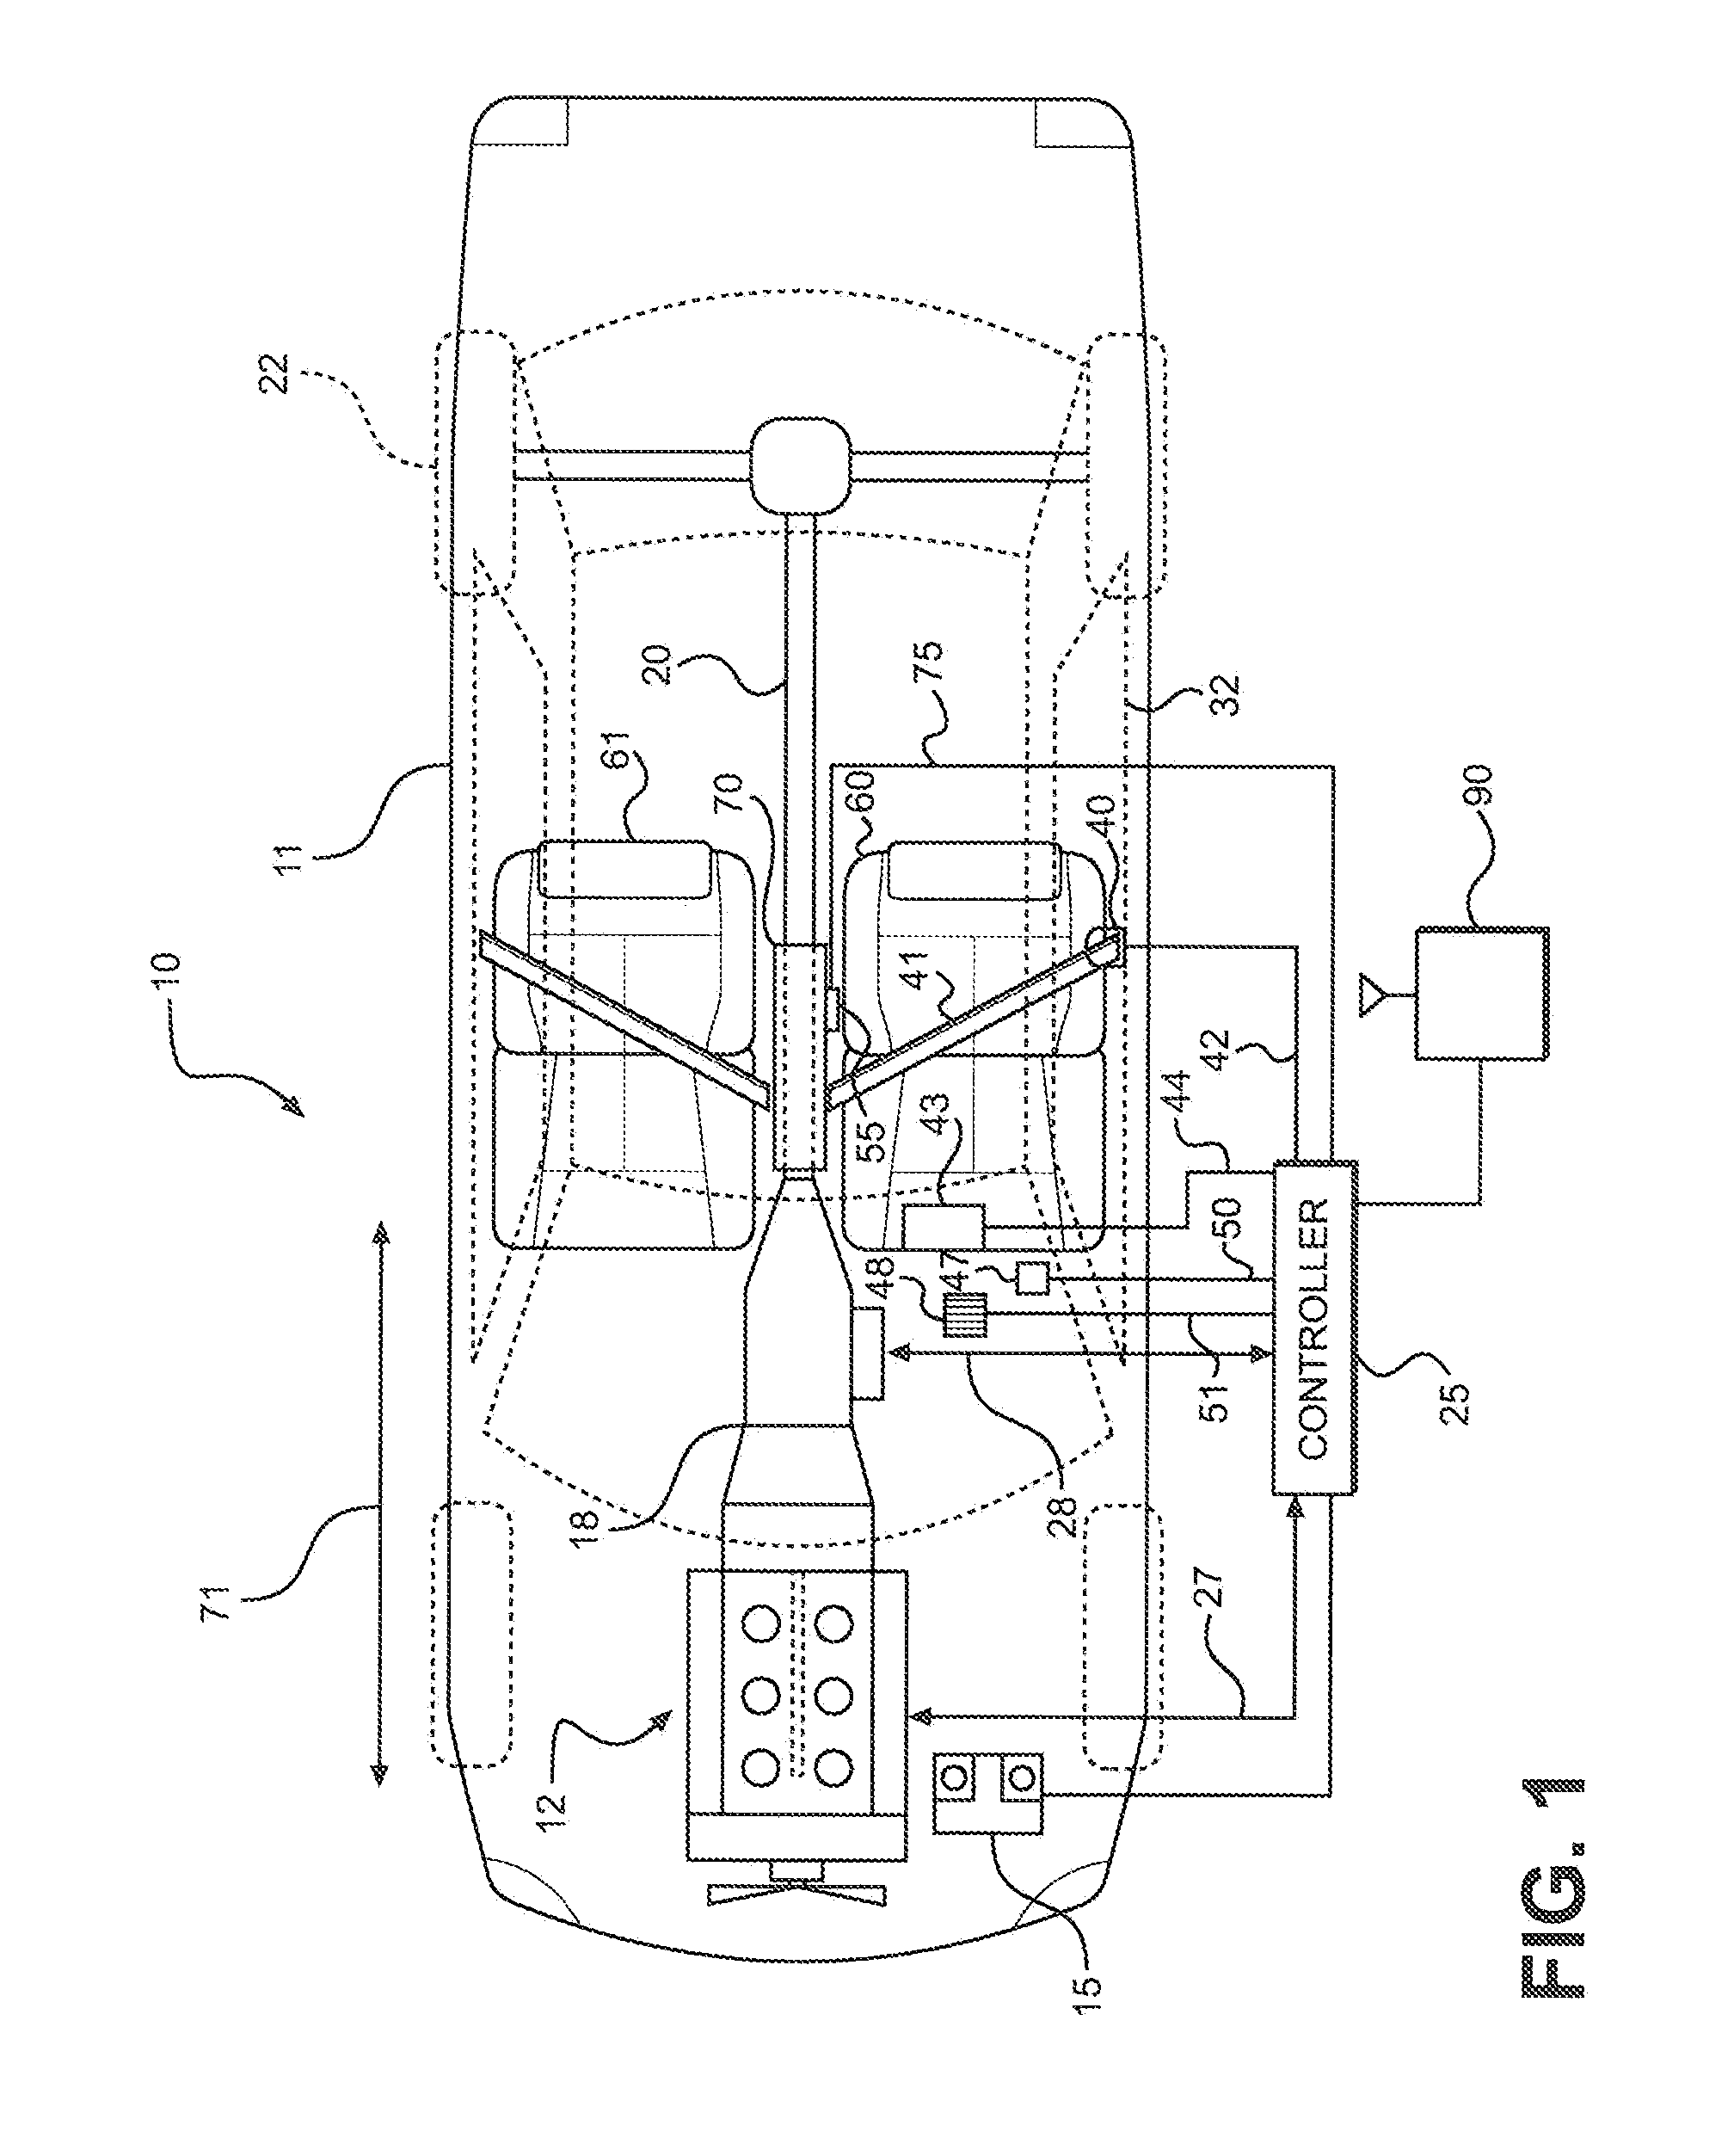 Mounting system for an electronic control module housing in a vehicle